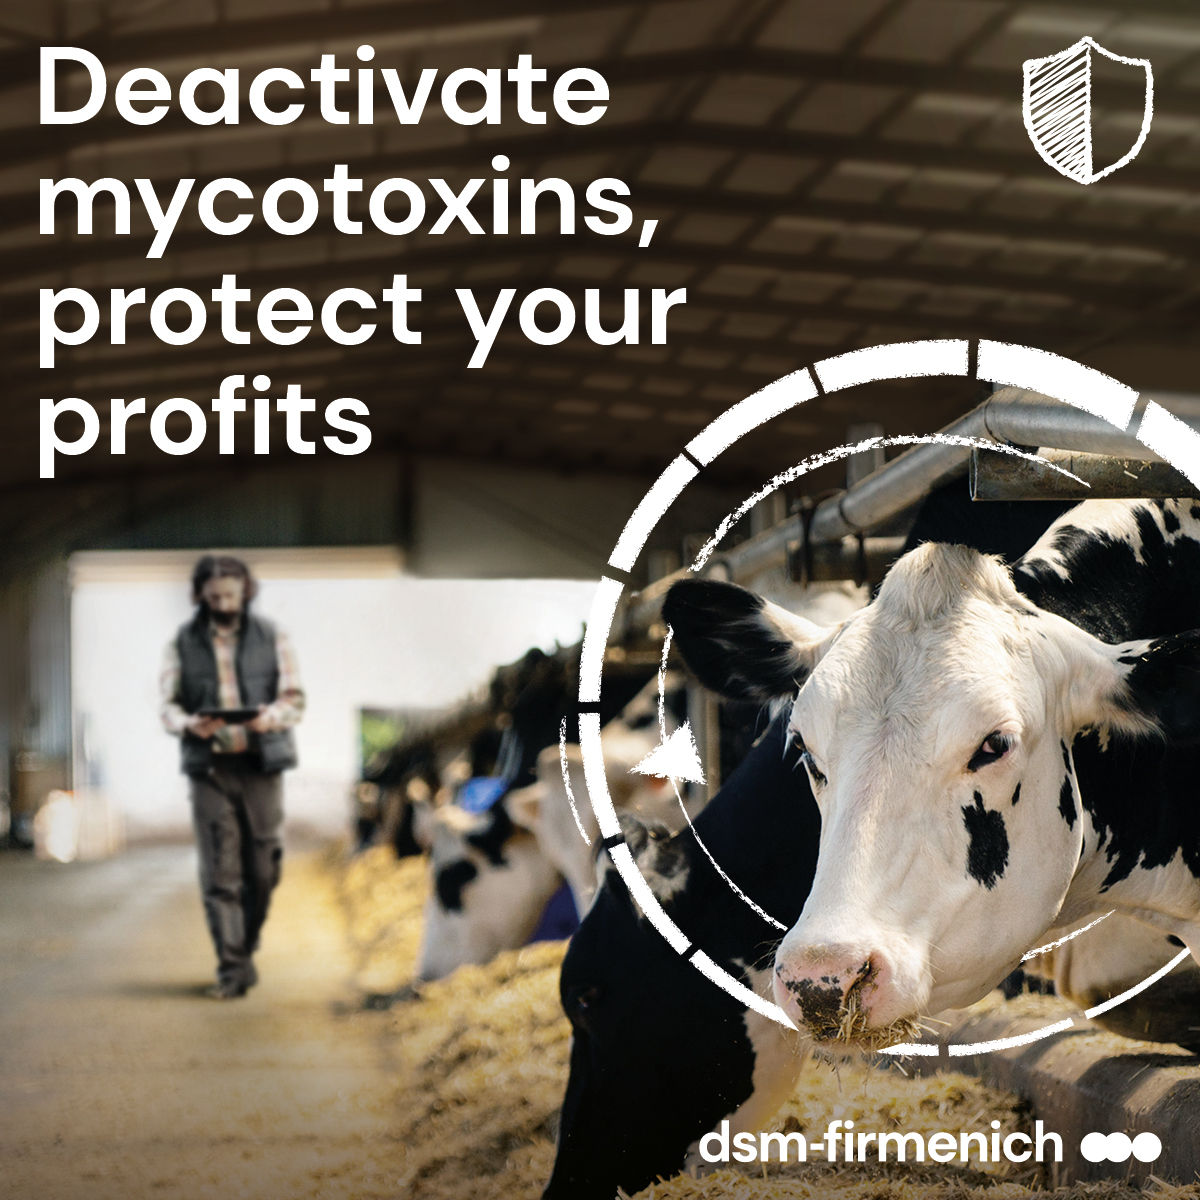 Webinar: Silent but Harmful: Why can’t we afford overlooking mycotoxins?